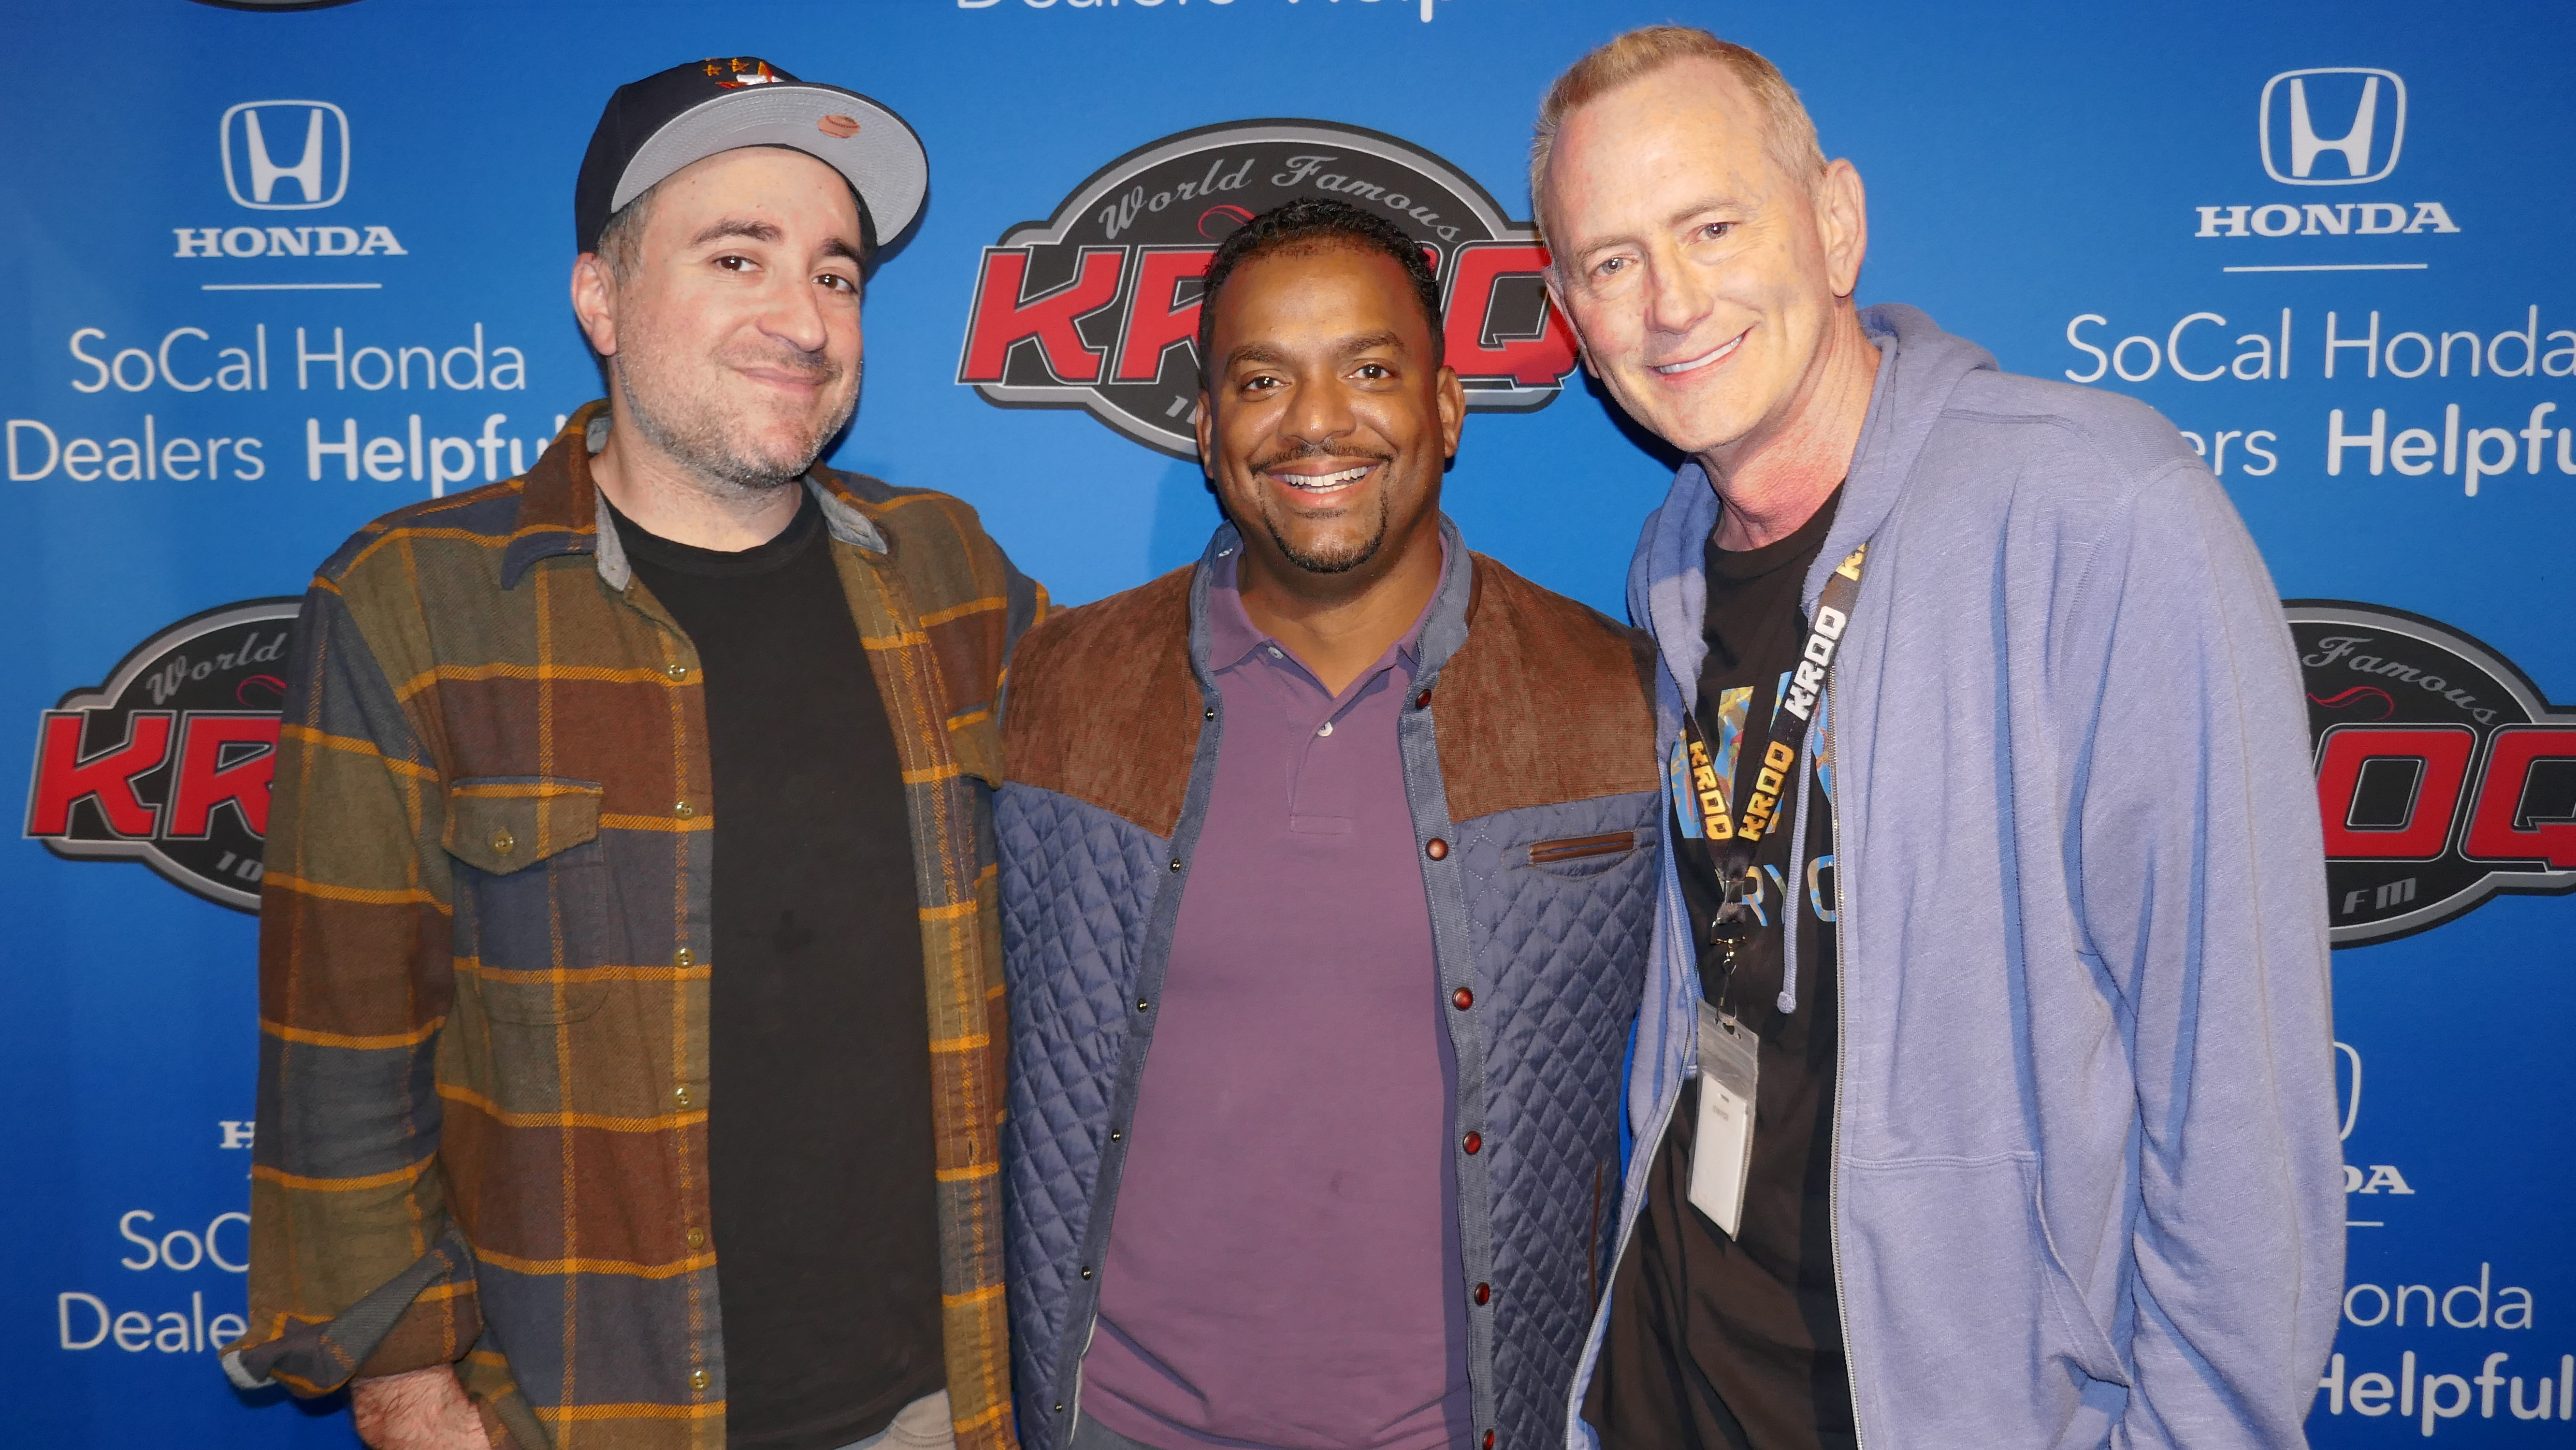 K&B Podcast: Wednesday, October 9th with guests David Boreanaz and Alfonso Ribeiro